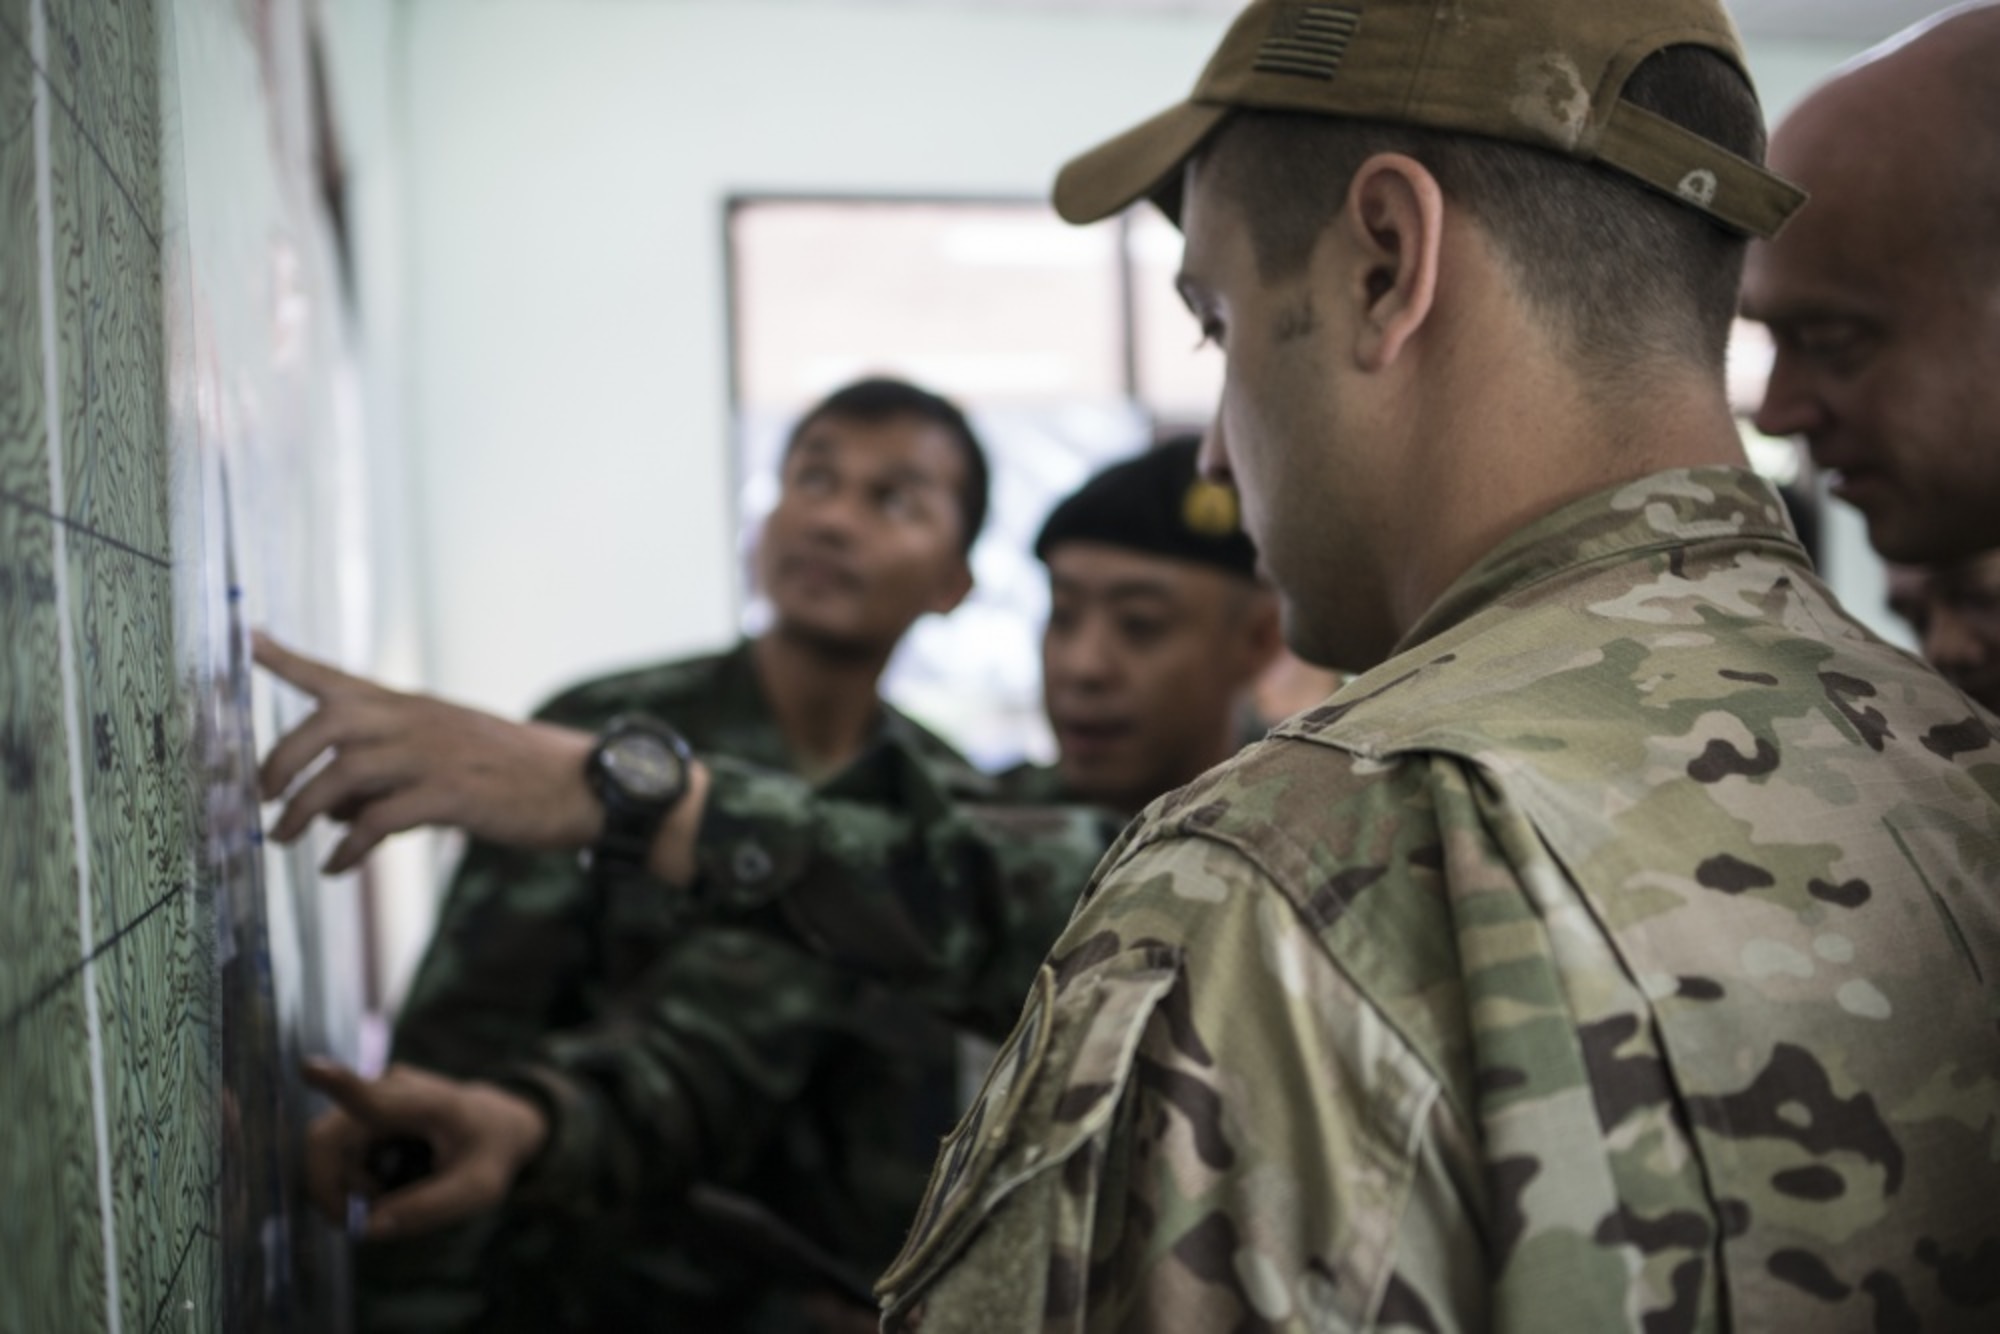 Airmen from the U.S. Indo-Pacific Command (USINDOPACOM) examine a map with Royal Thai military officials June 29, 2018, at Chiang Rai, Thailand. The United States, through USINDOPACOM, sent a search and rescue team to Tham Luang cave in Northern Thailand at the request of the Royal Thai government to assist in the rescue of the missing Thai soccer players and their coach. (U.S. Air Force photo by Capt. Jessica Tait)